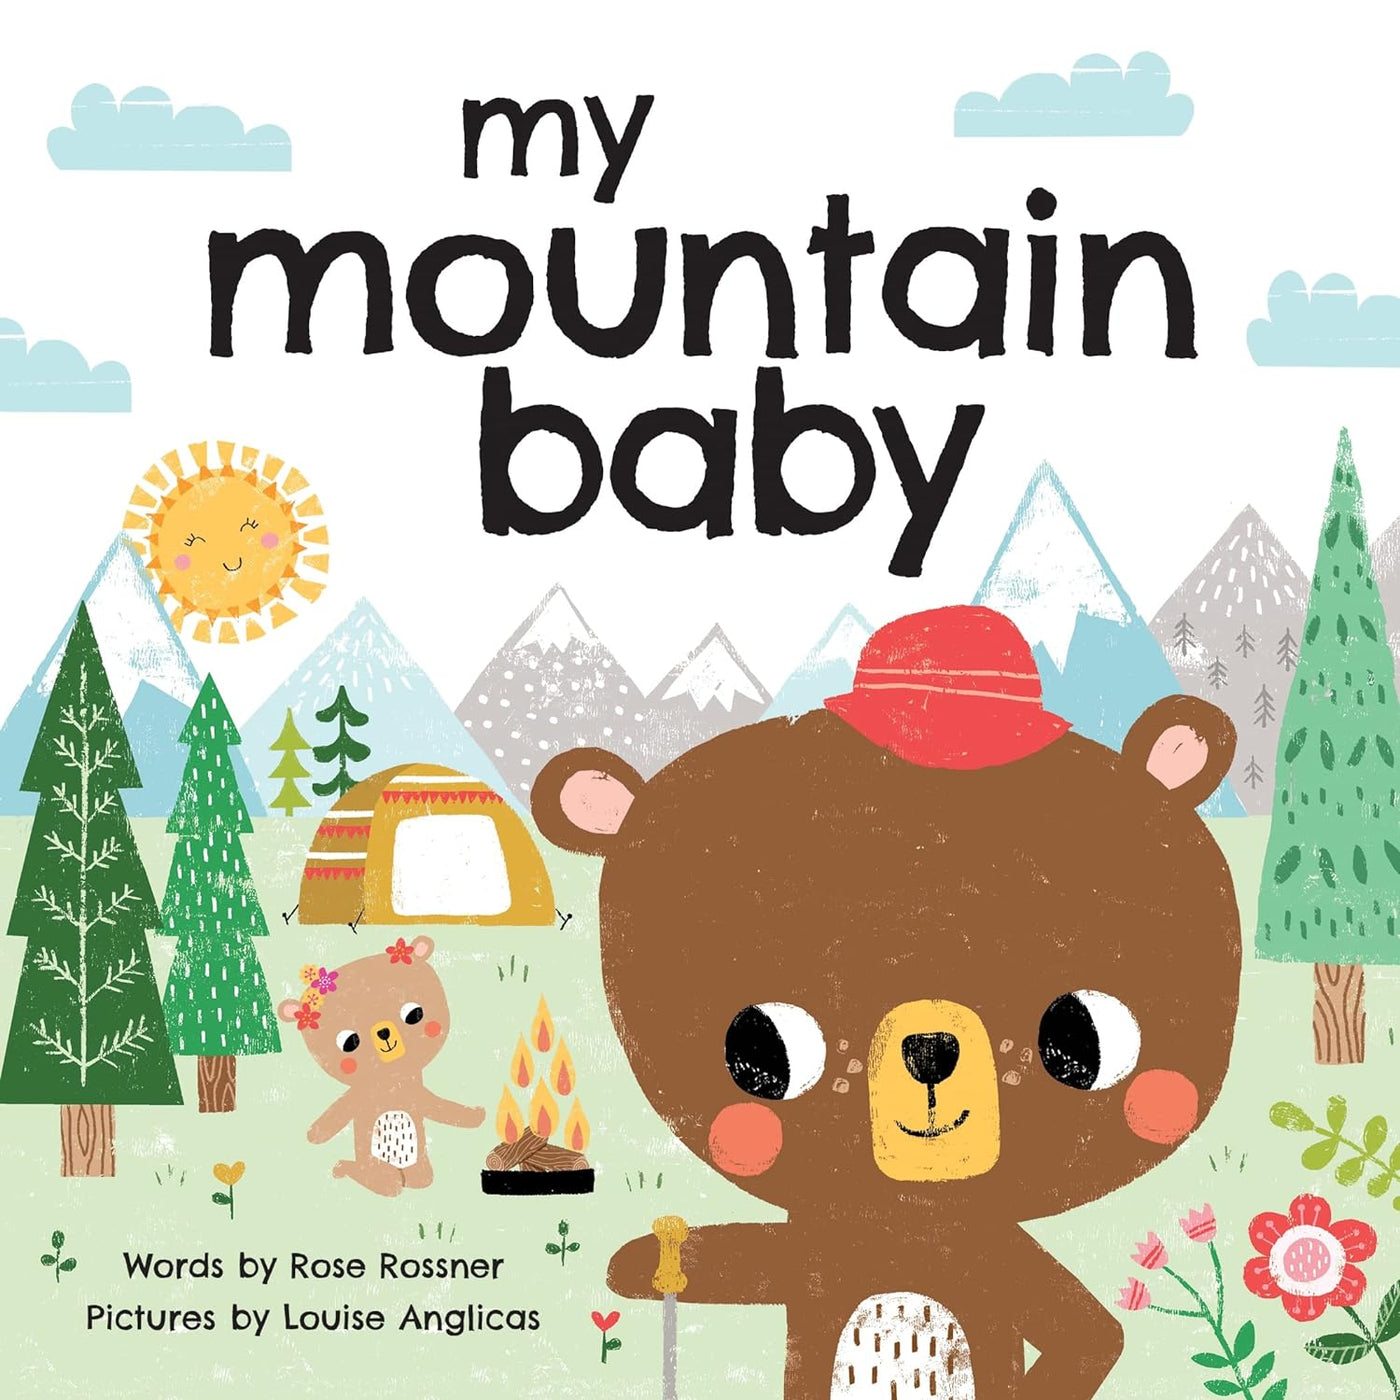 My Mountain Baby: Explore the Outdoors in this Sweet I Love You Book!